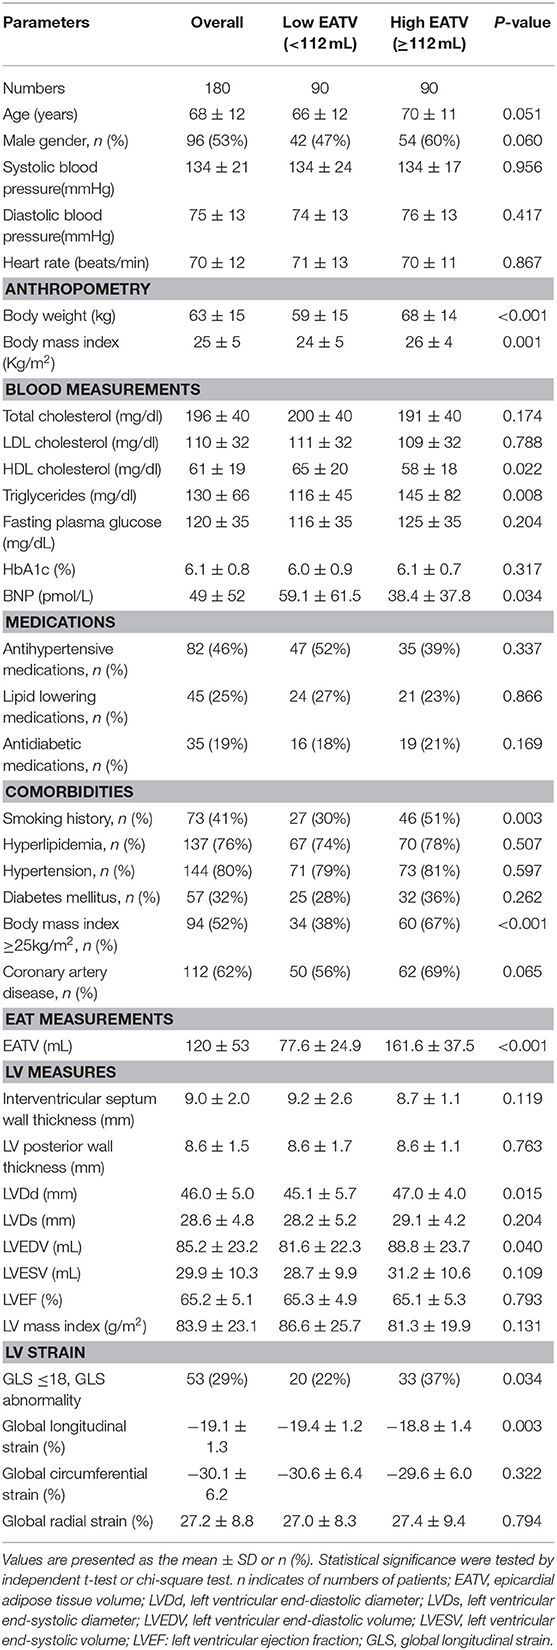 Frontiers  Deleterious Effects of Epicardial Adipose Tissue Volume on Global  Longitudinal Strain in Patients With Preserved Left Ventricular Ejection  Fraction